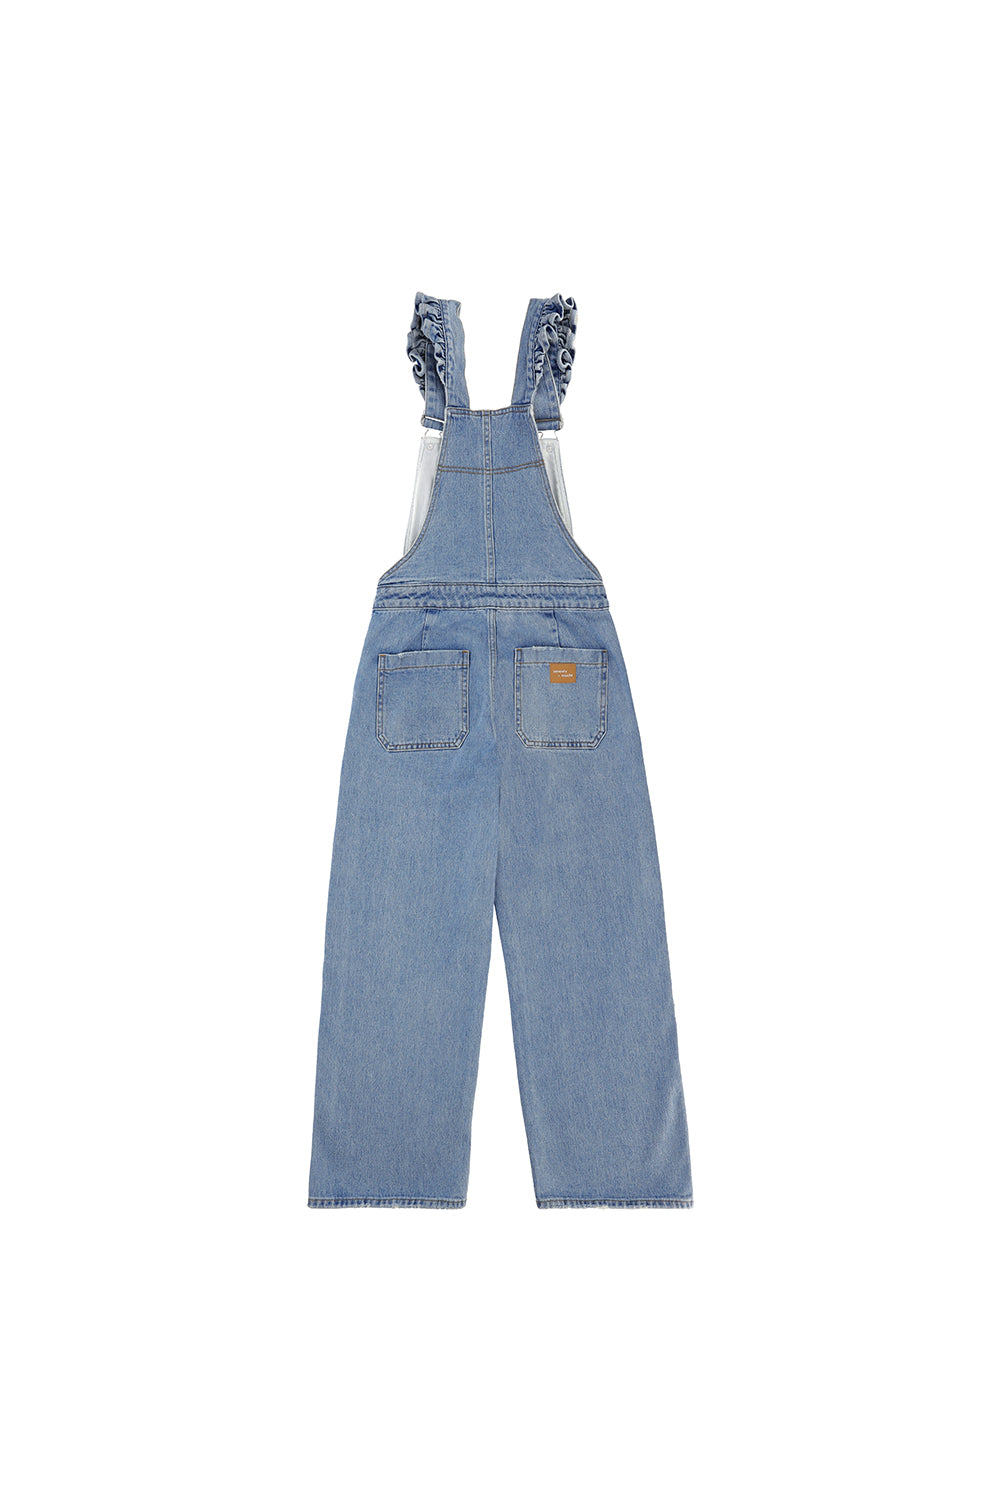 Elodie Frill Overalls in Rodeo Vintage